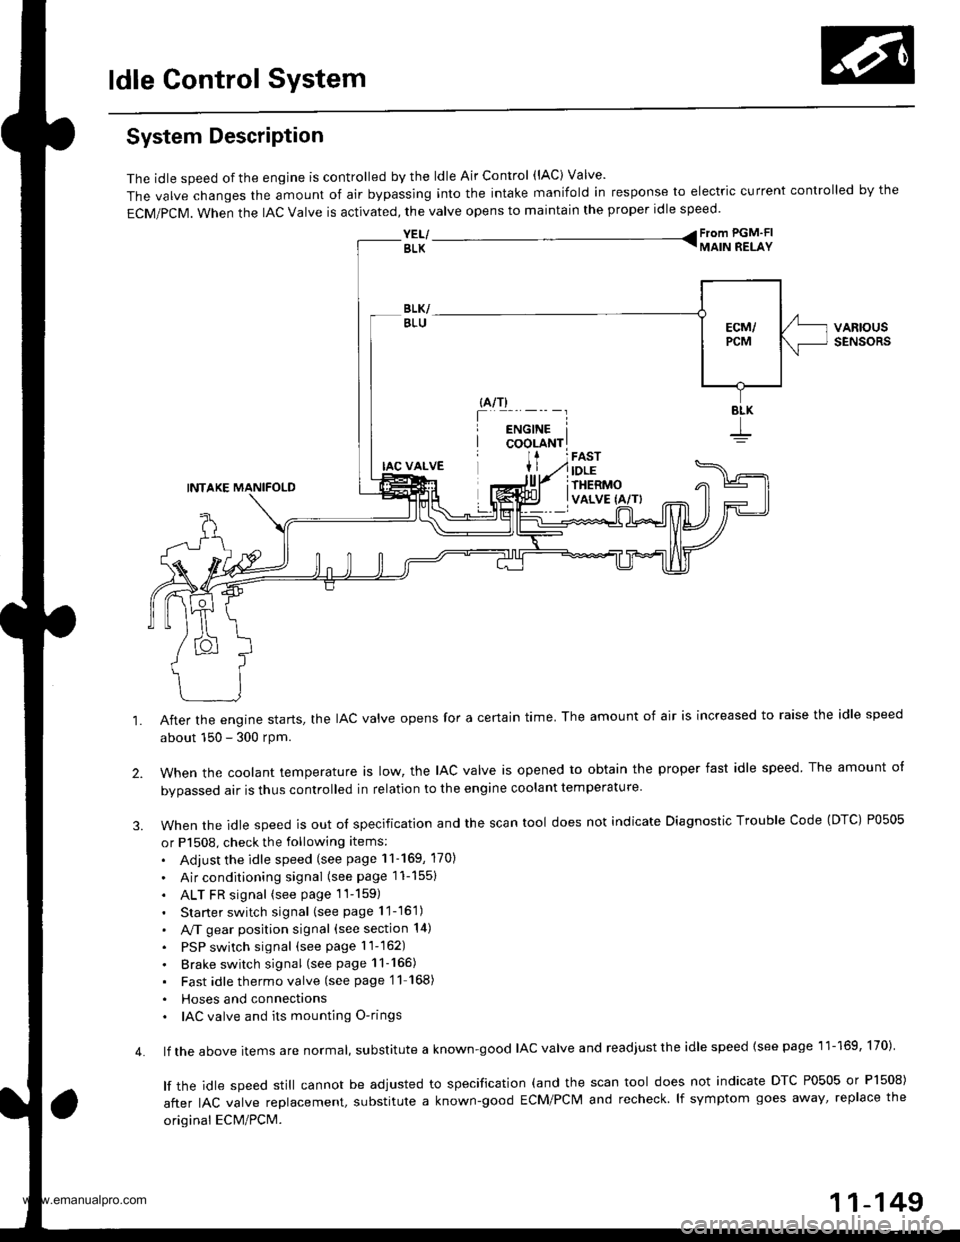 HONDA CR-V 1999 RD1-RD3 / 1.G User Guide 
ldle Control System
System Description
The idle speed of the engjne is controlled by the ldle Air Control (lAC) Valve
The valve changes the amount of air bypassing into the intake manifold in respon